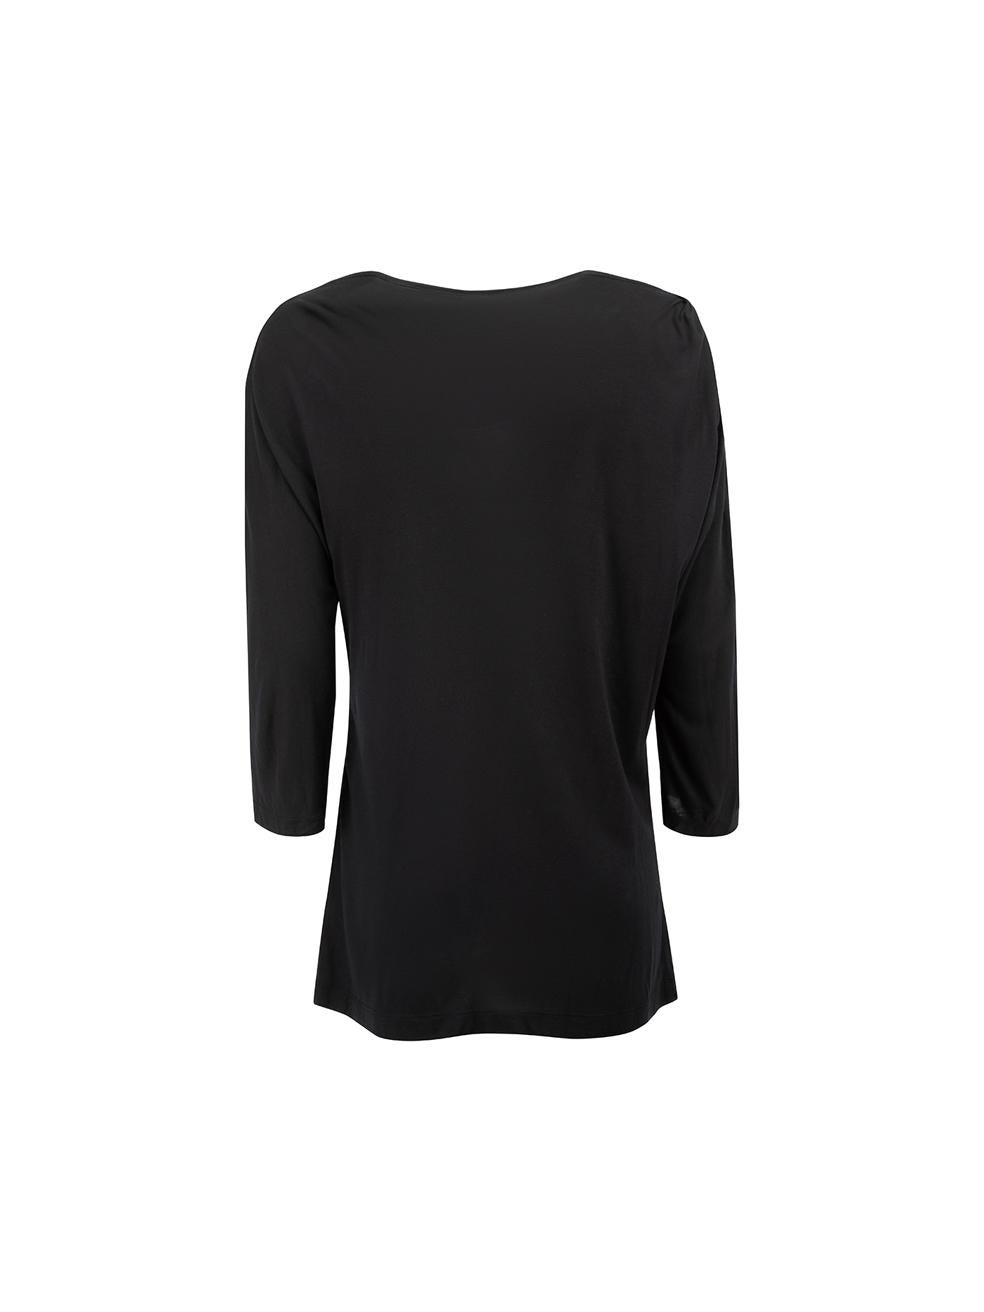 Dries van Noten Black Bateau Neck Mid Sleeves Top Size M In Good Condition For Sale In London, GB